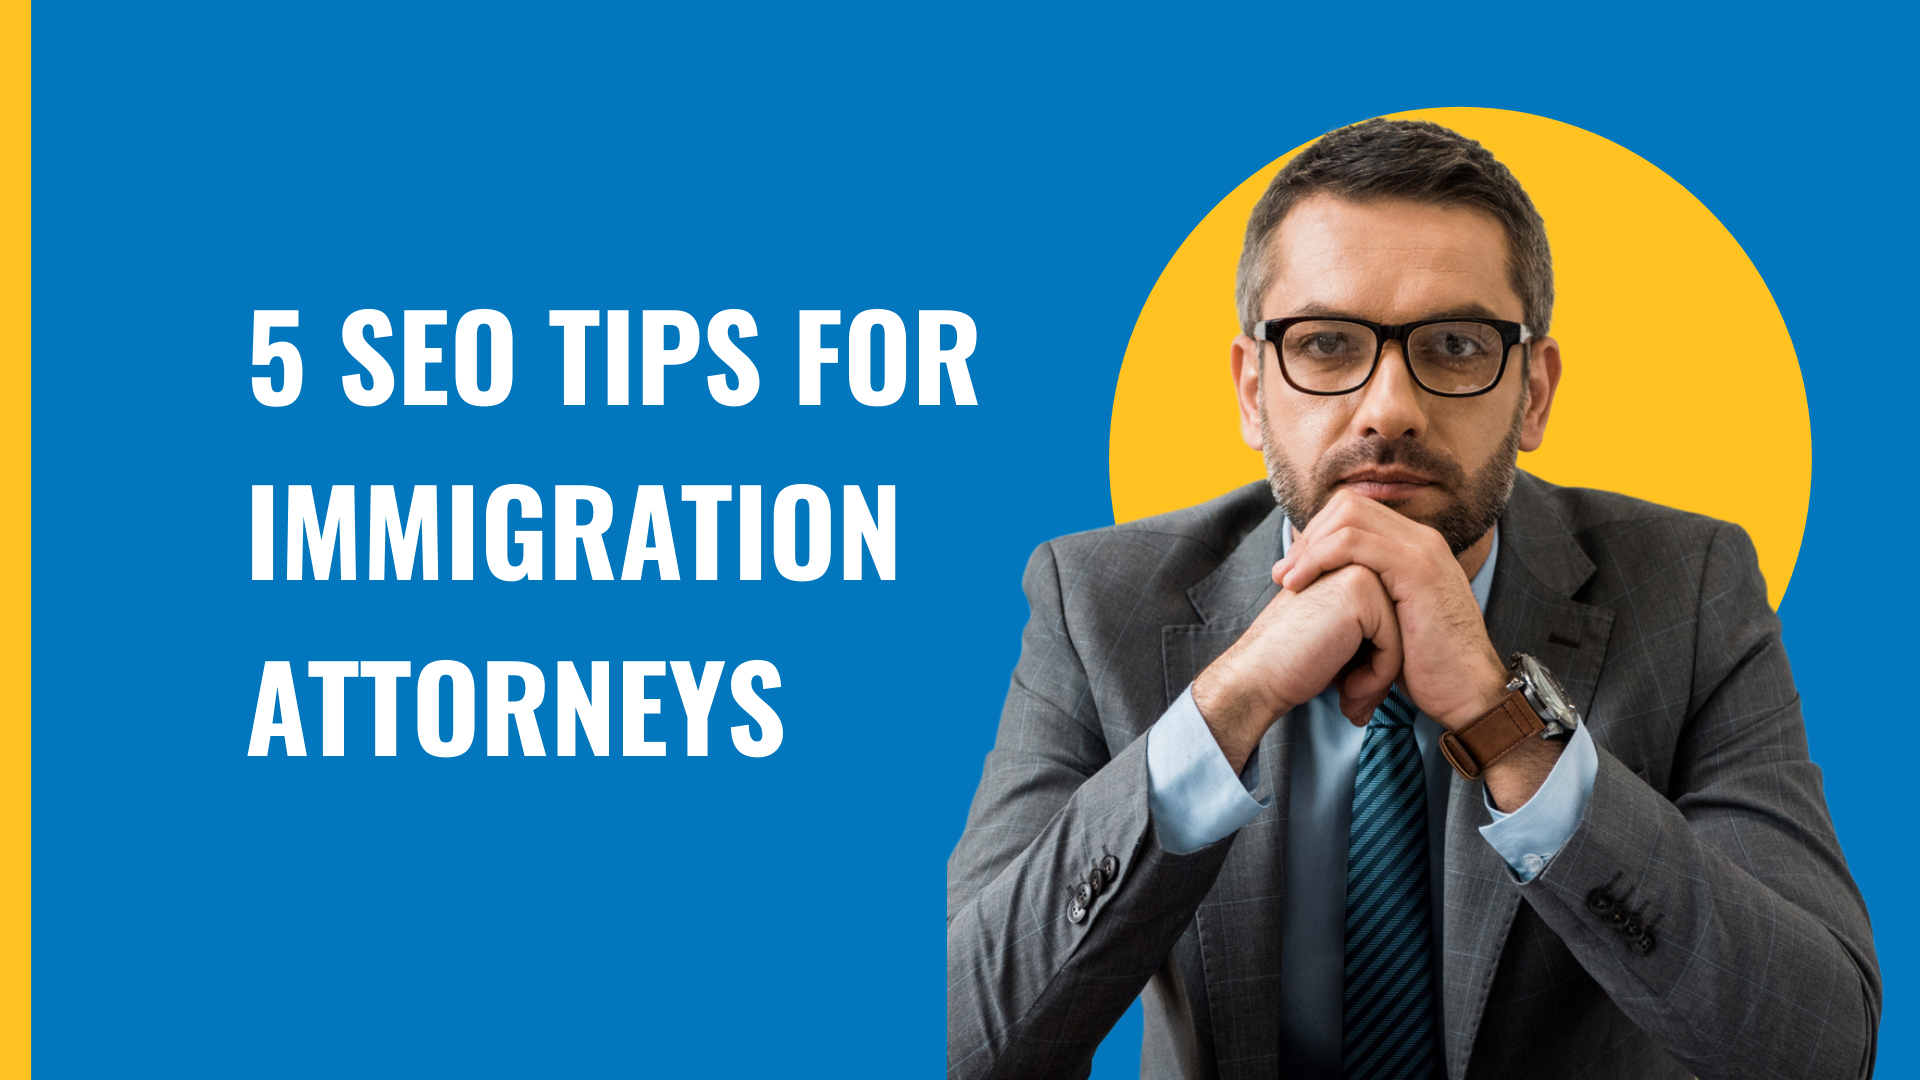 SEO Tips for Immigration Attorneys